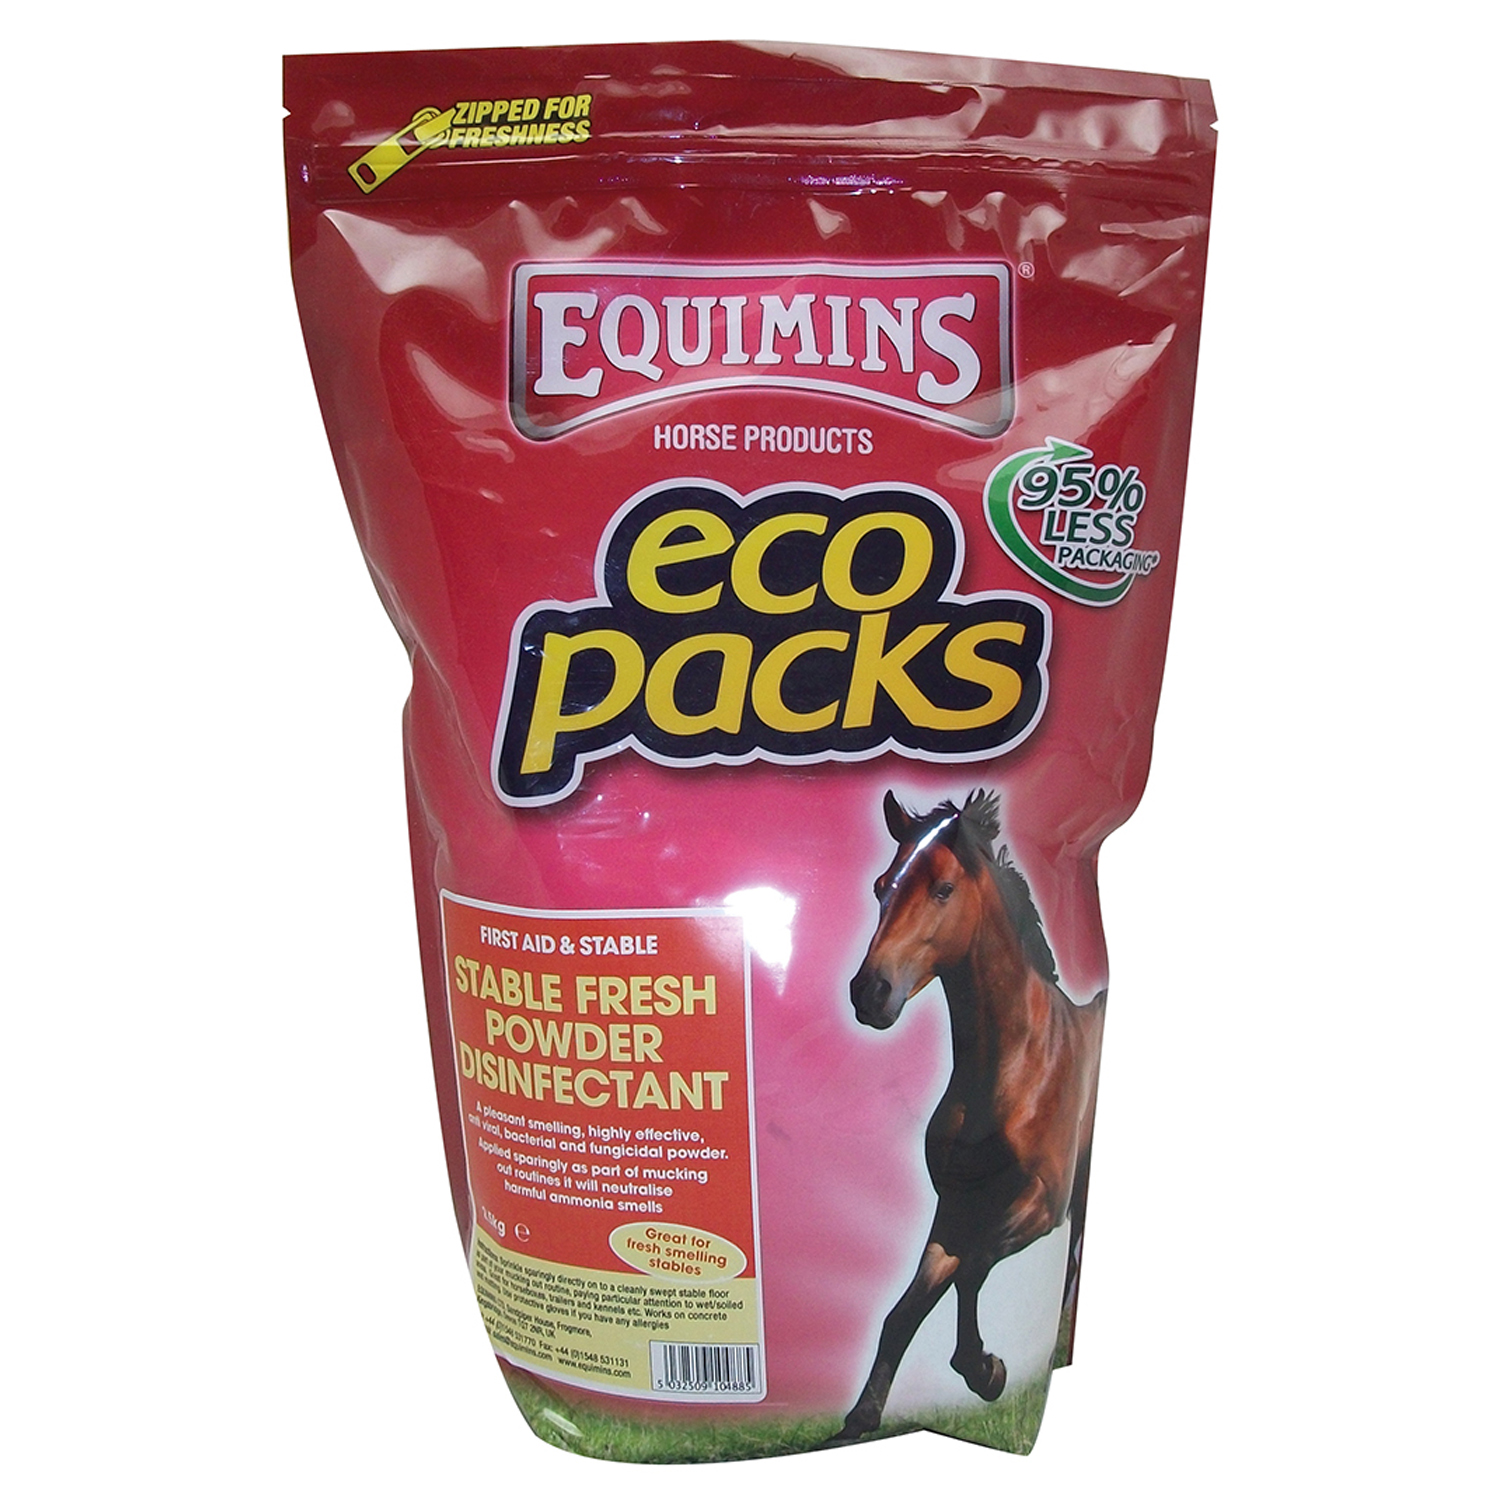 EQUIMINS STABLE FRESH POWDER DISINFECTANT 2.5 KG ECO PACK 2.5 KG REFILL